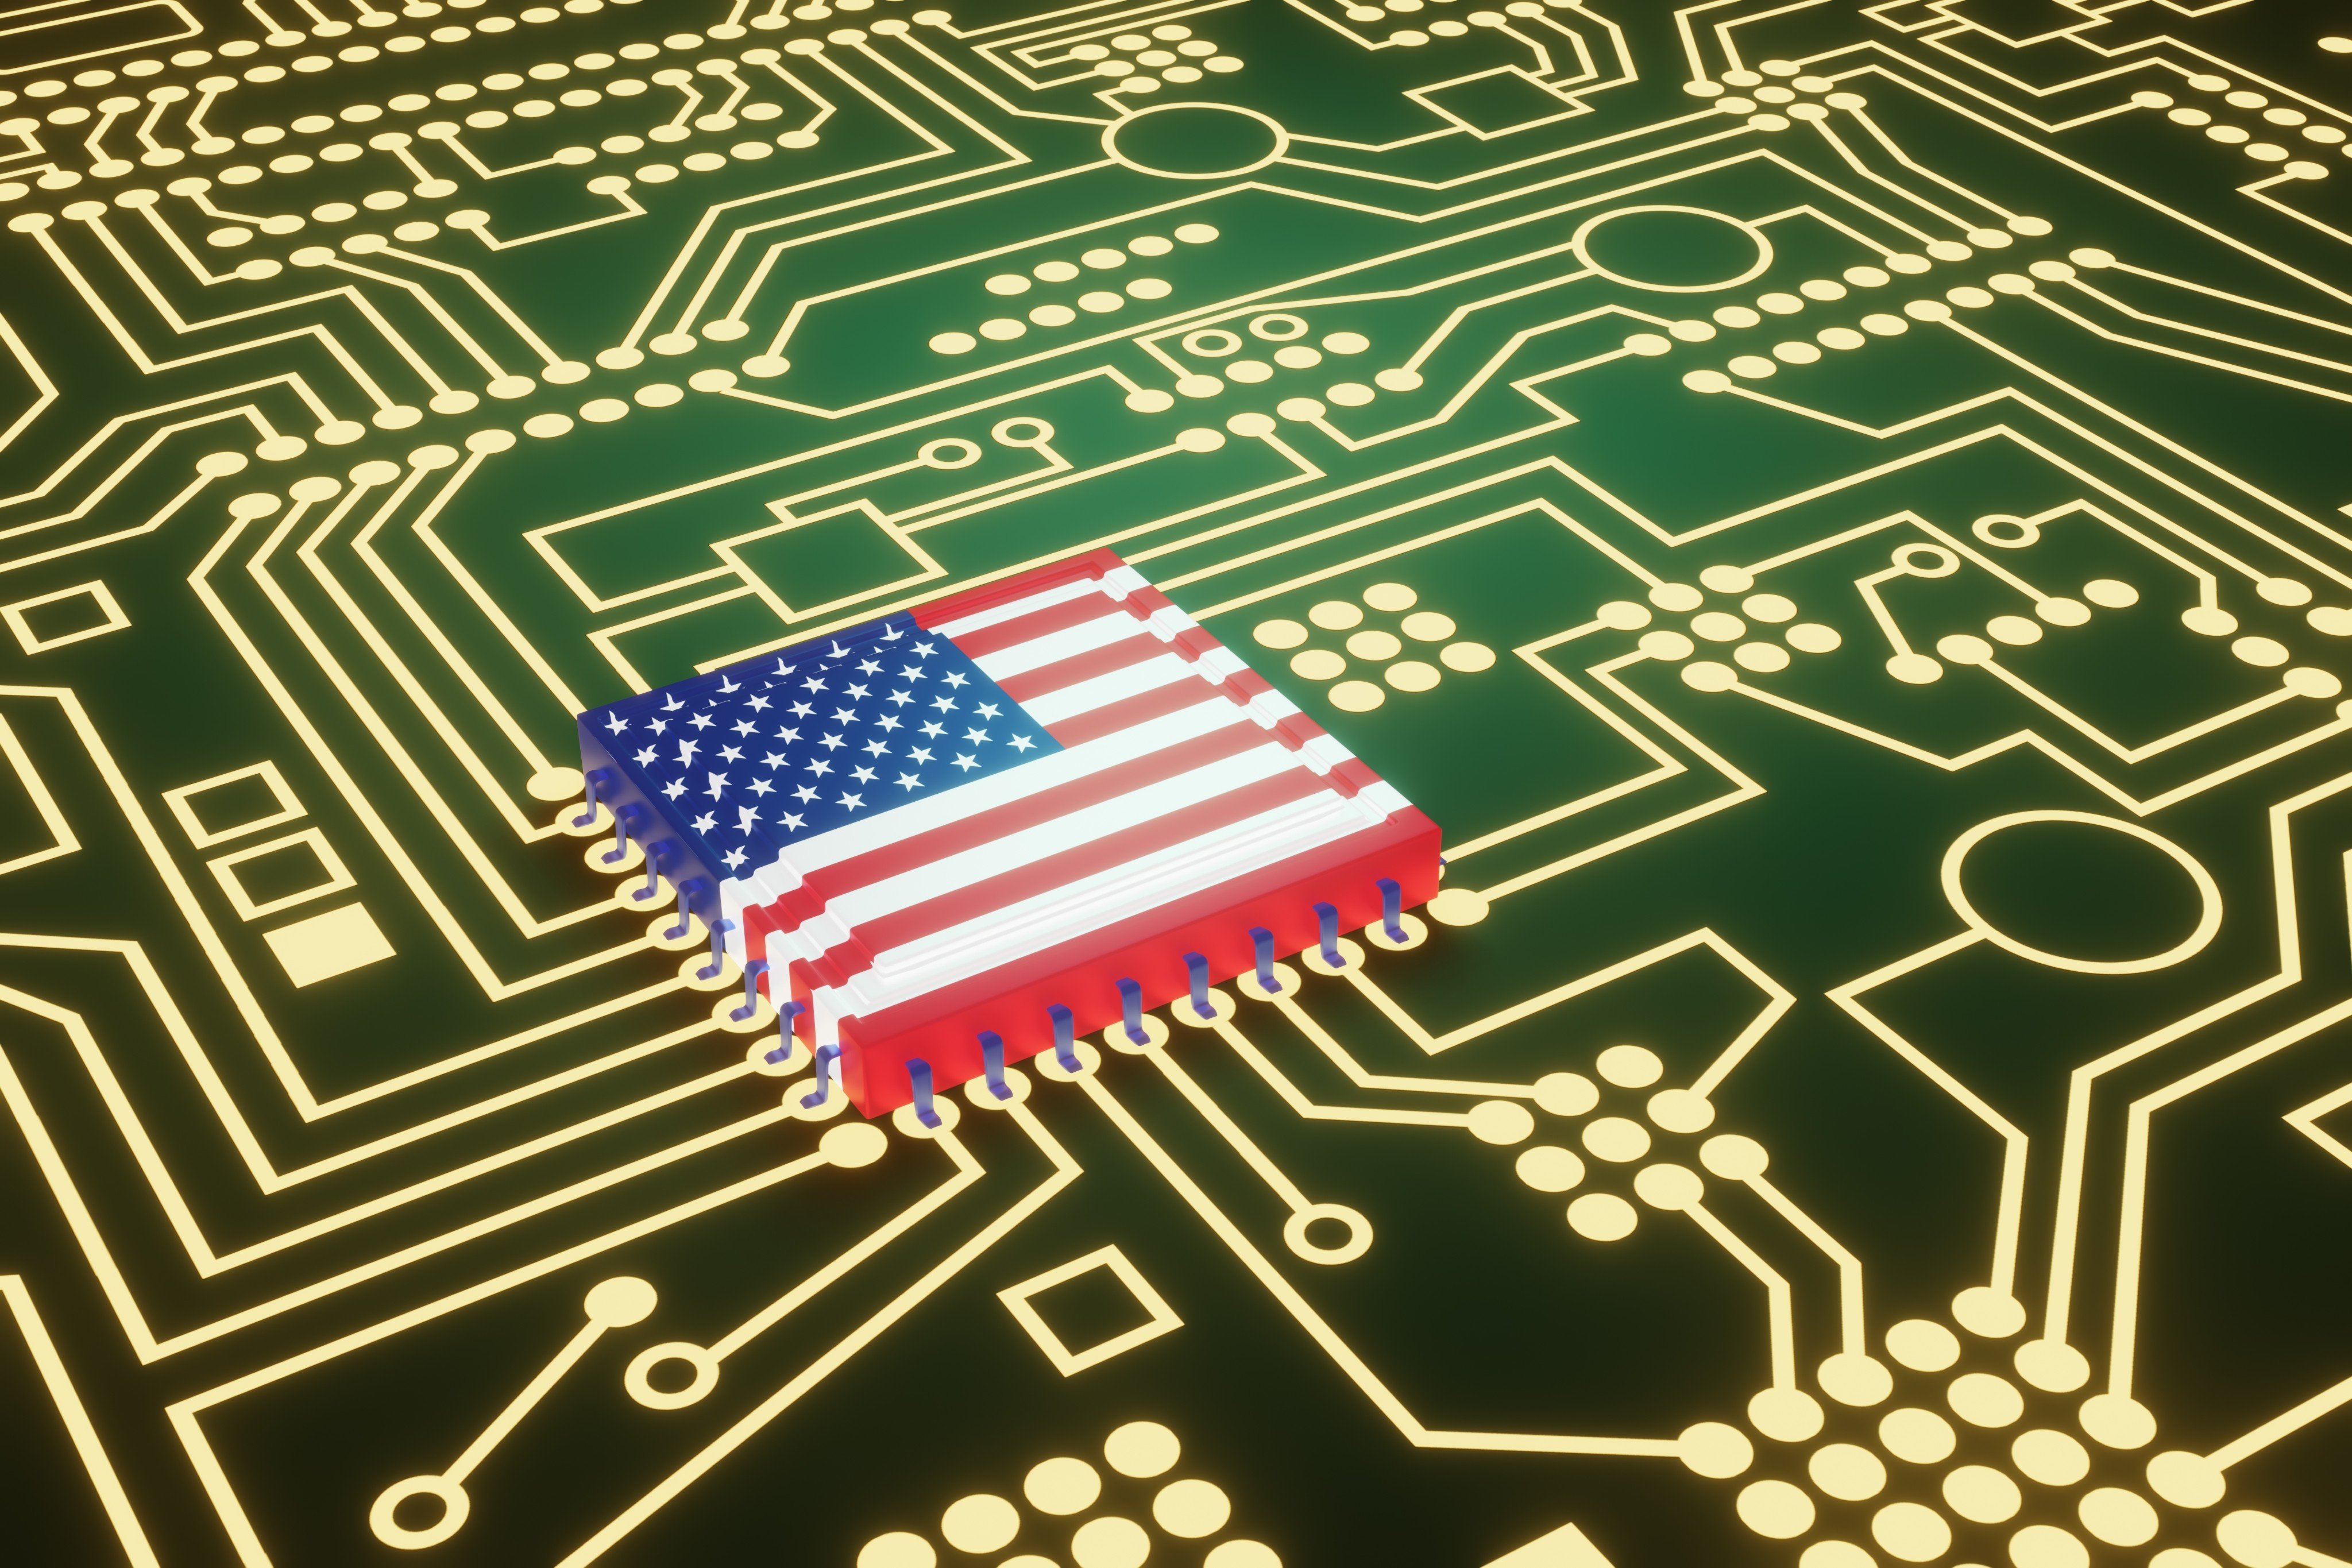 The United States’ 31 new regional tech hubs will focus on areas including semiconductors, clean energy, critical minerals, biotechnology, artificial intelligence and quantum computing. Image: Shutterstock